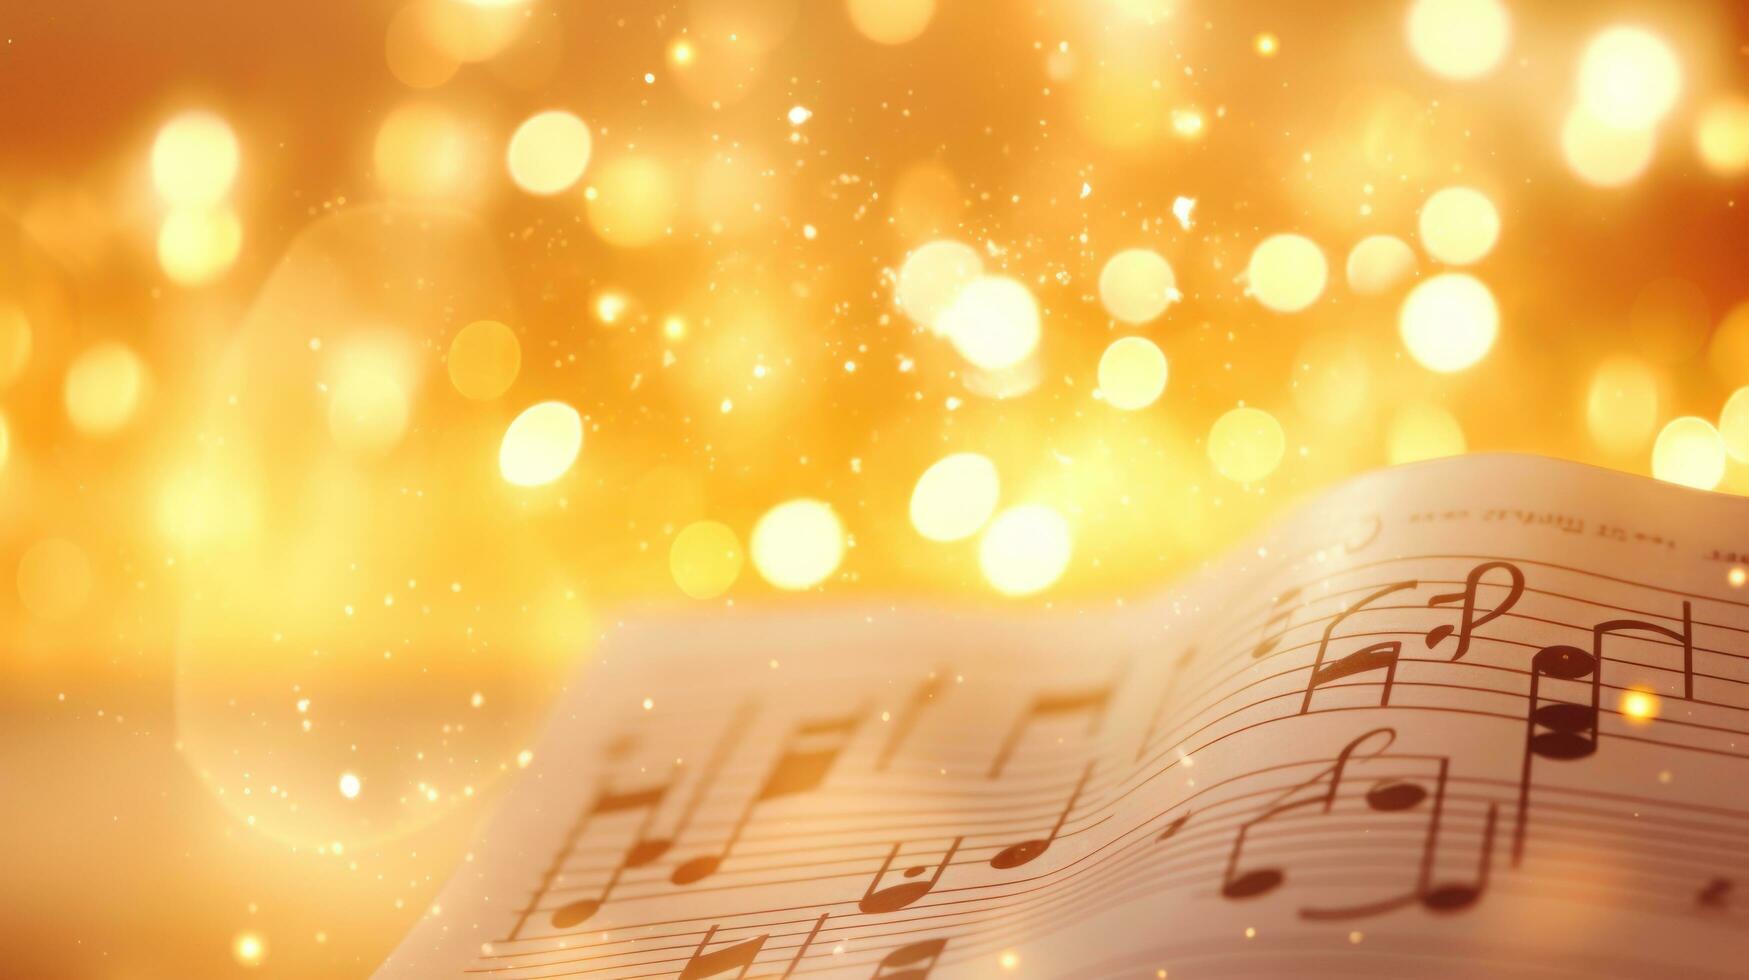 Music notes background with lights photo